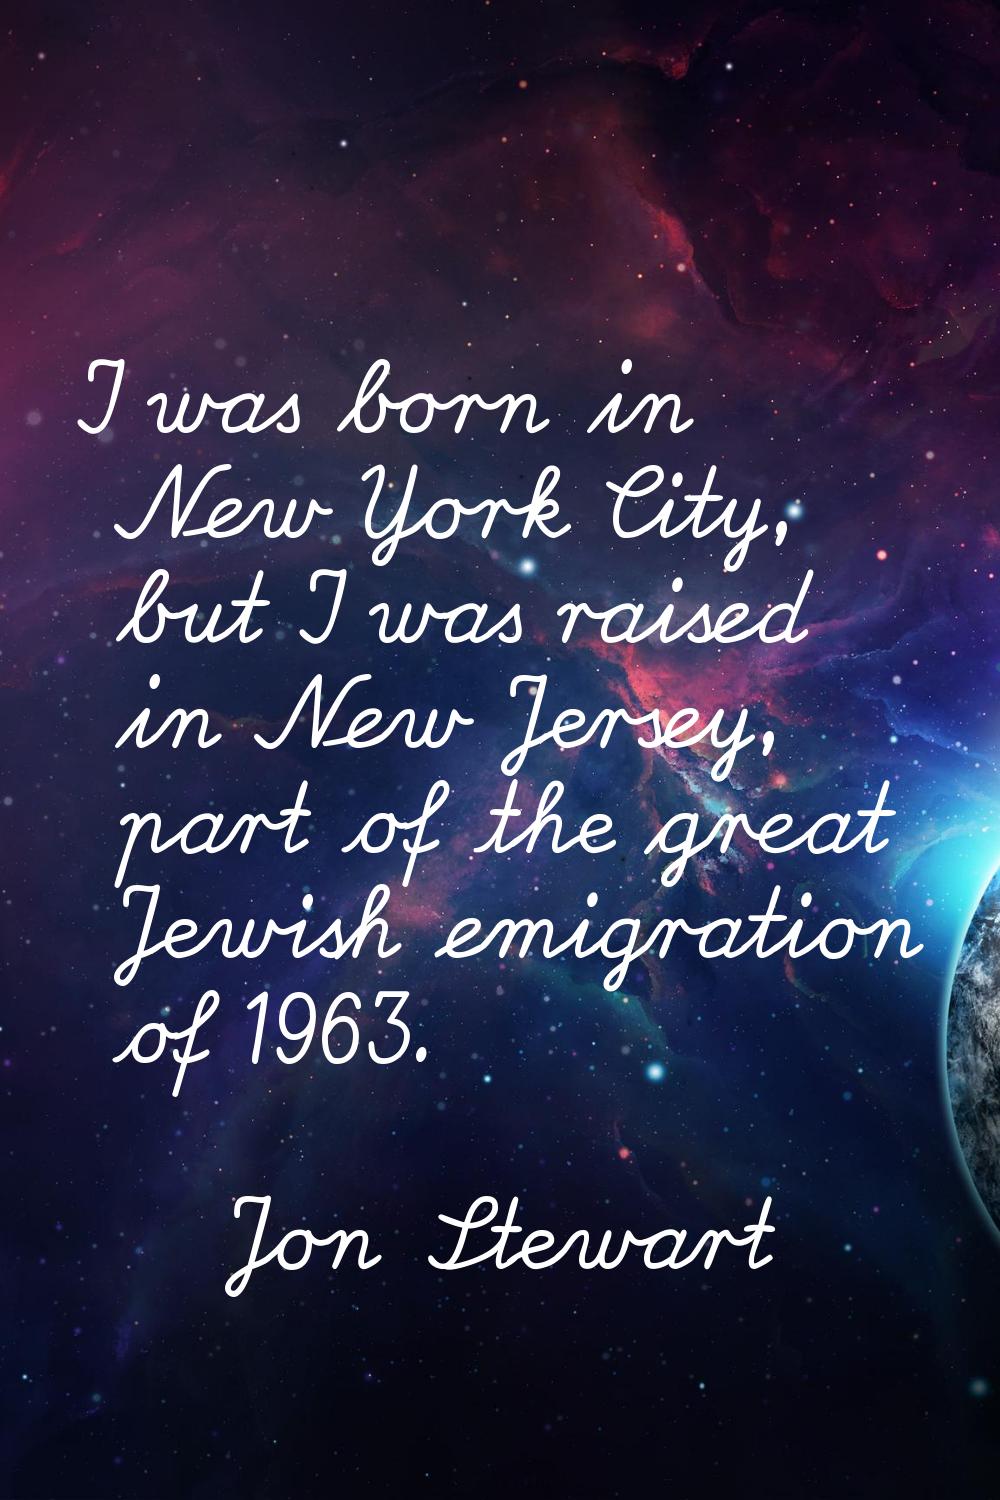 I was born in New York City, but I was raised in New Jersey, part of the great Jewish emigration of